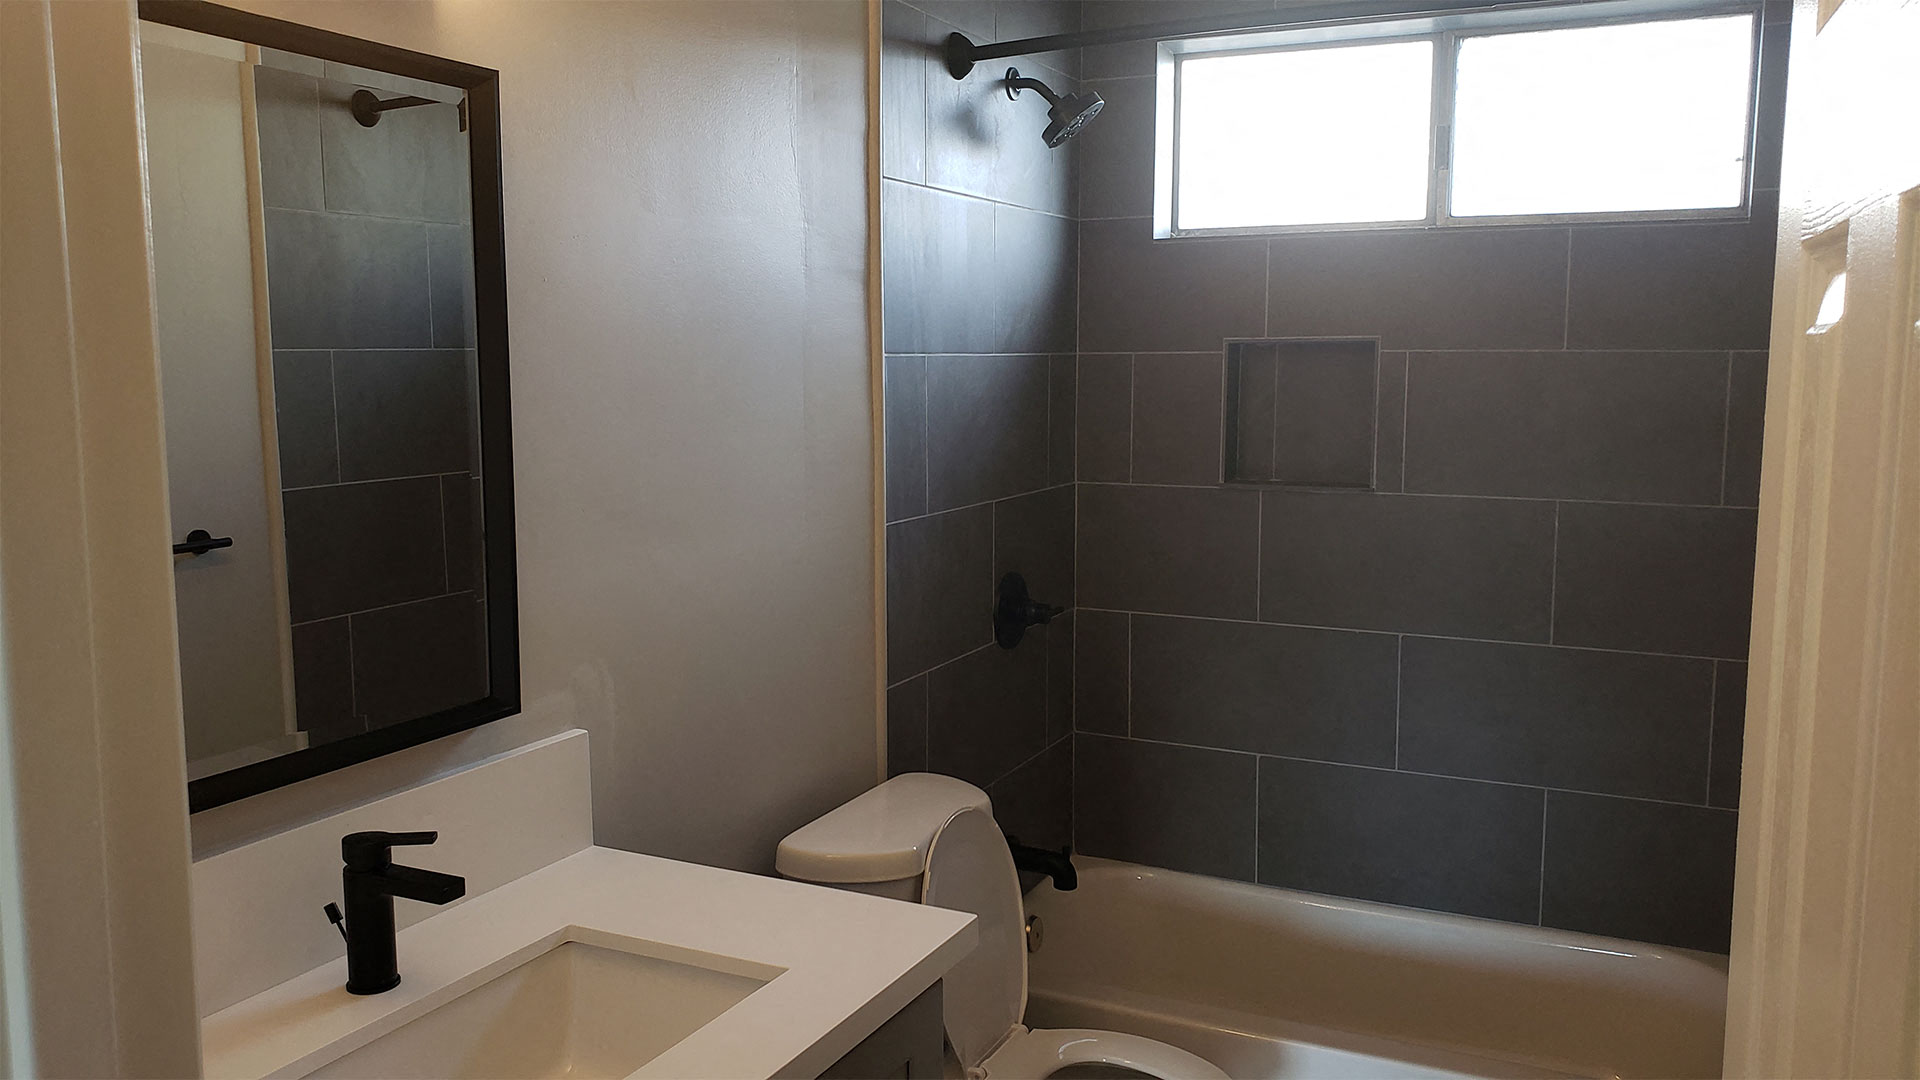 Bathroom With Modern Design and Details at Wilson Apartments in Glendale, CA